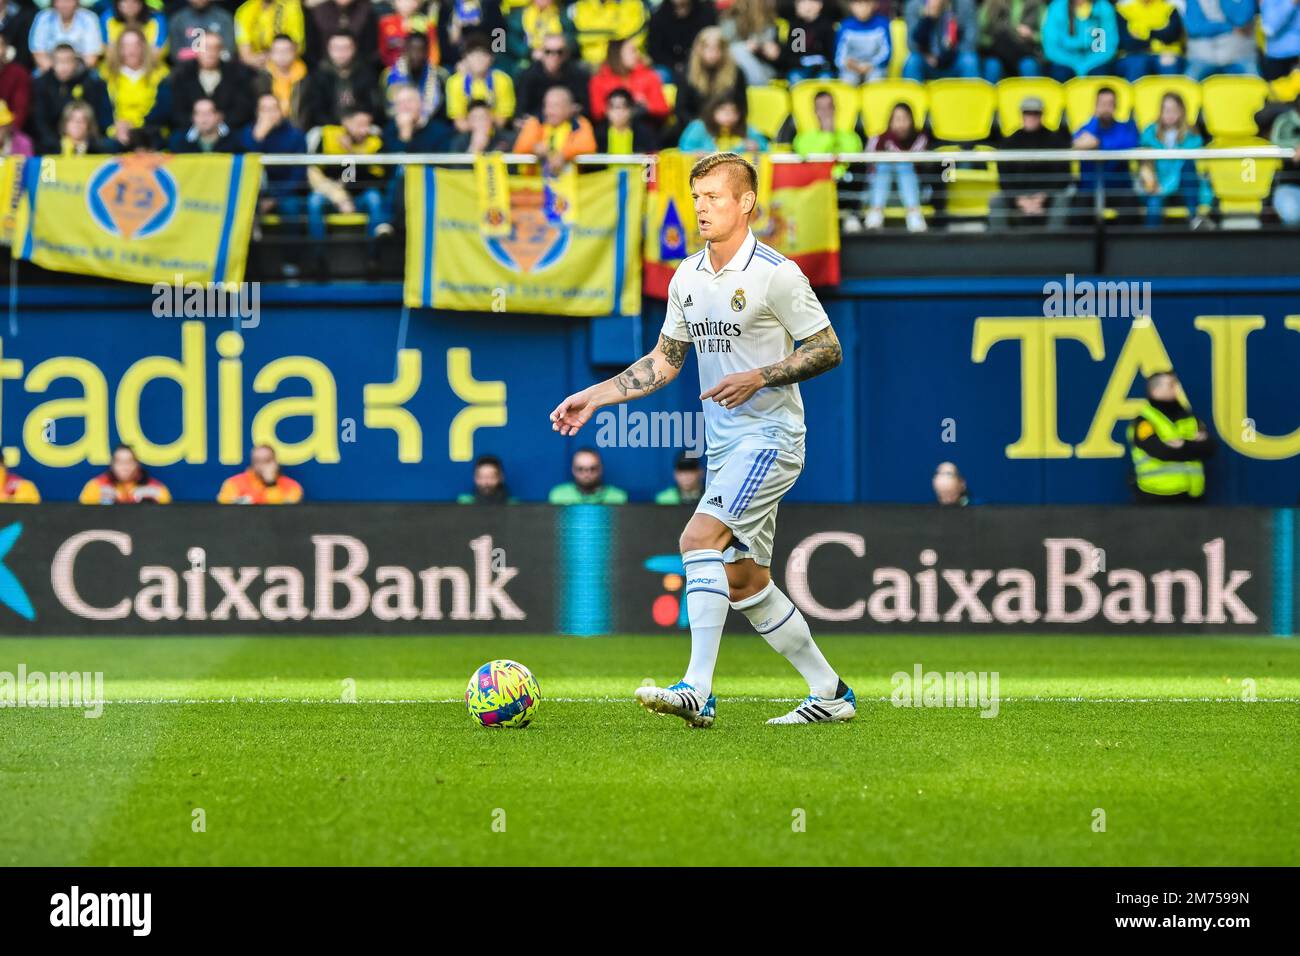 VILLARREAL, SPAIN - JANUARY 7: Toni Kroos of Real Madrid CF focus during the match between Villarreal CF and Real Madrid CF of La Liga Santander on January 7, 2023 at Estadi de la Ceramica in Villarreal, Spain. (Photo by Samuel Carreño/ PX Images) Credit: Px Images/Alamy Live News Stock Photo